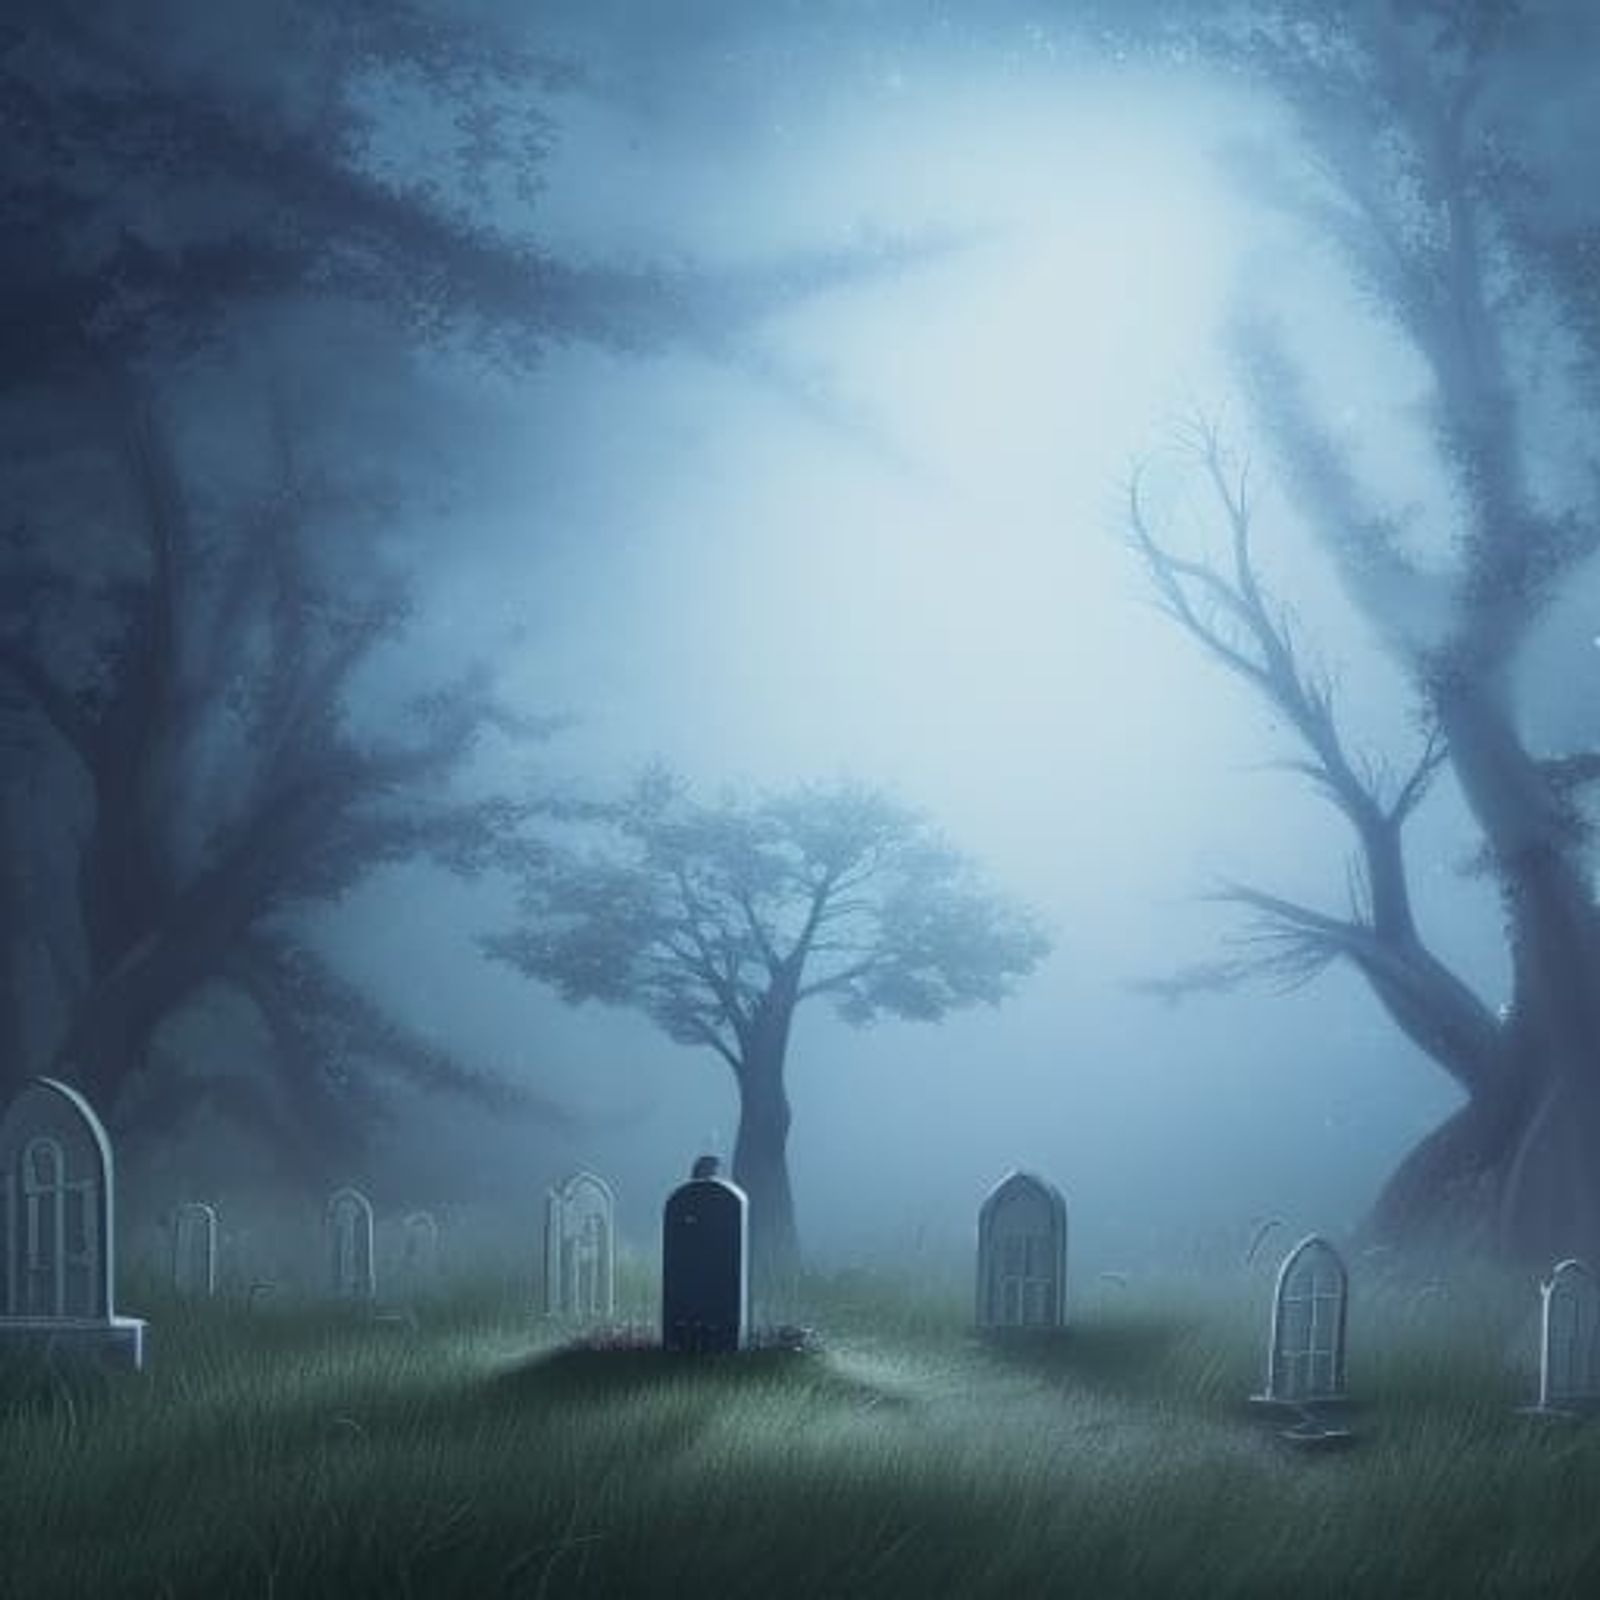 foggy cemetery at night